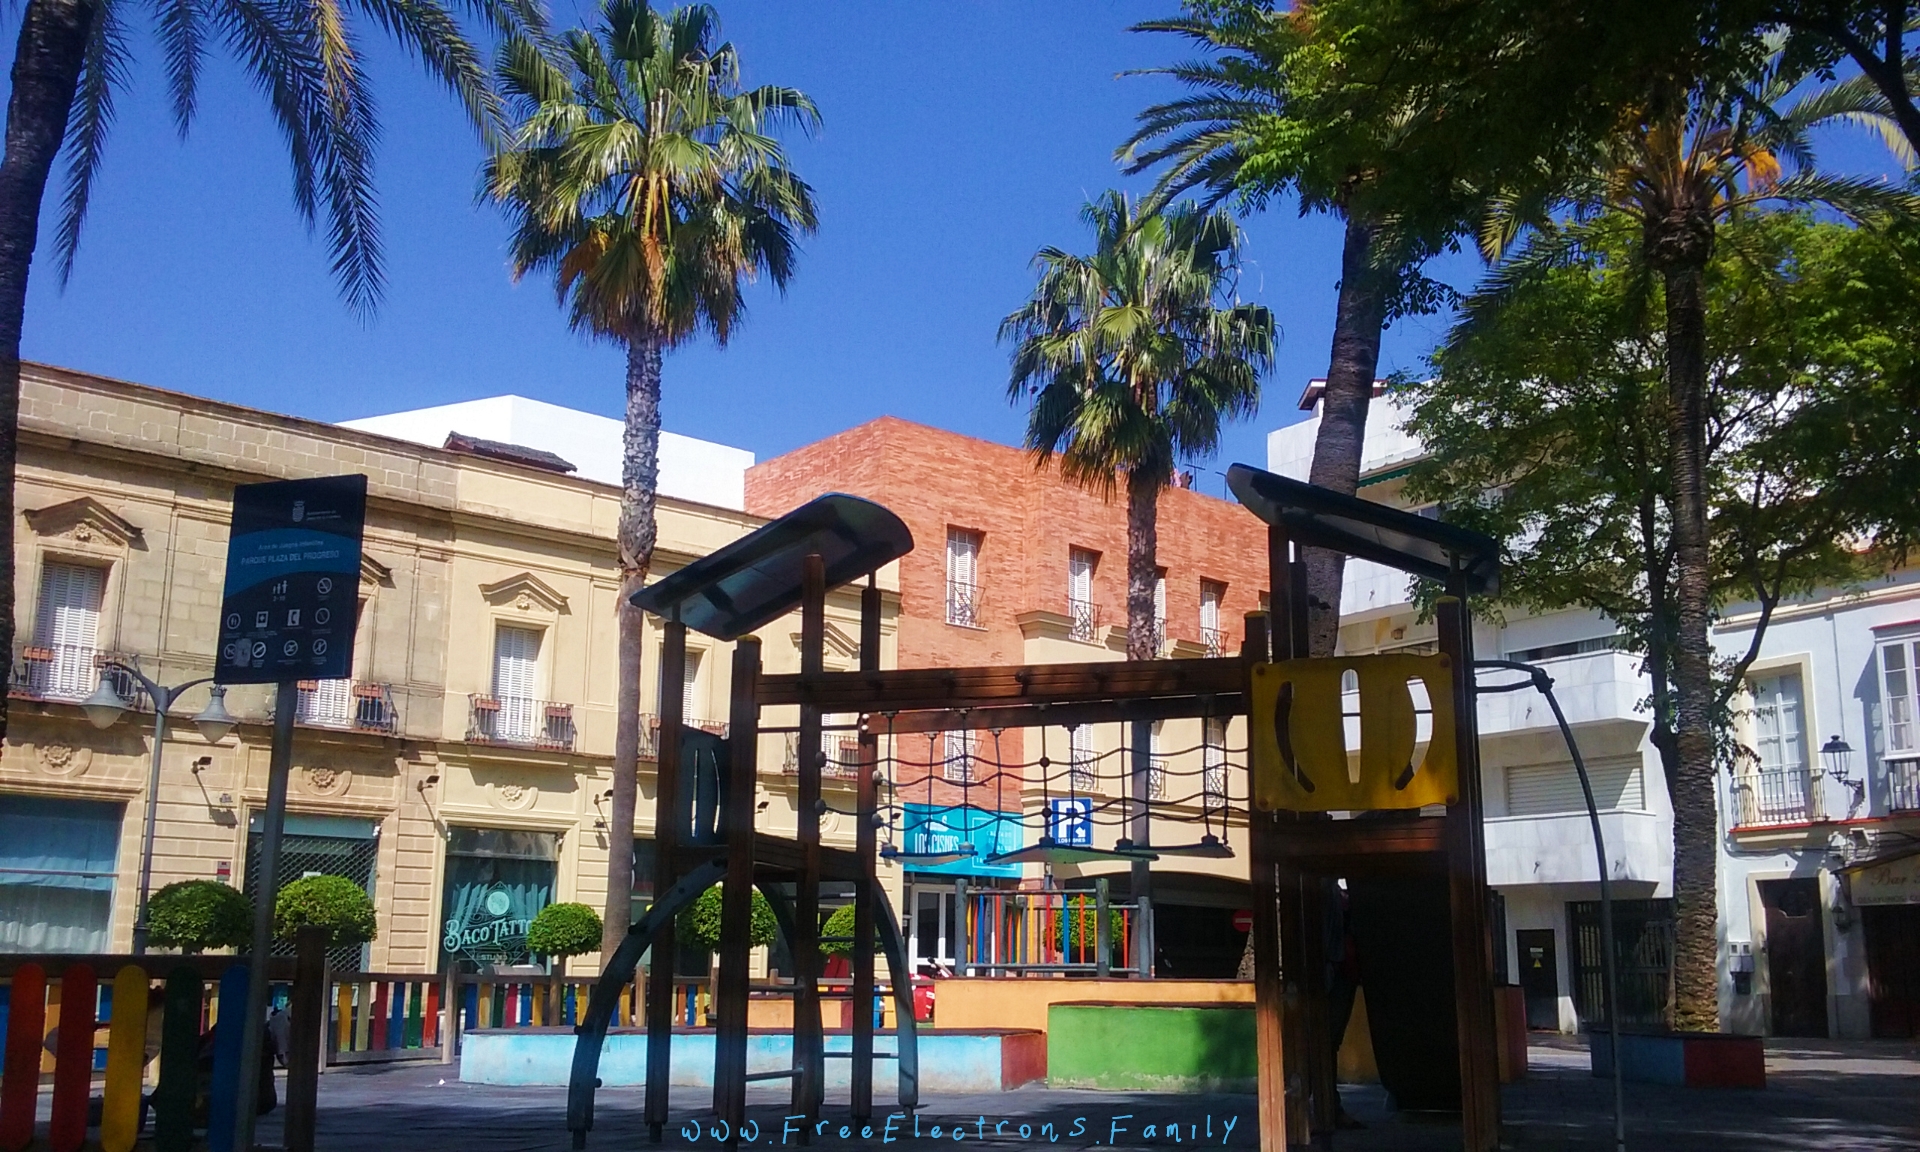  Plaza del Progresso:  old and worn-out play things at the plazas Area de Juegos Infantiles (playground) surrounded by tapas bars/restaurants.